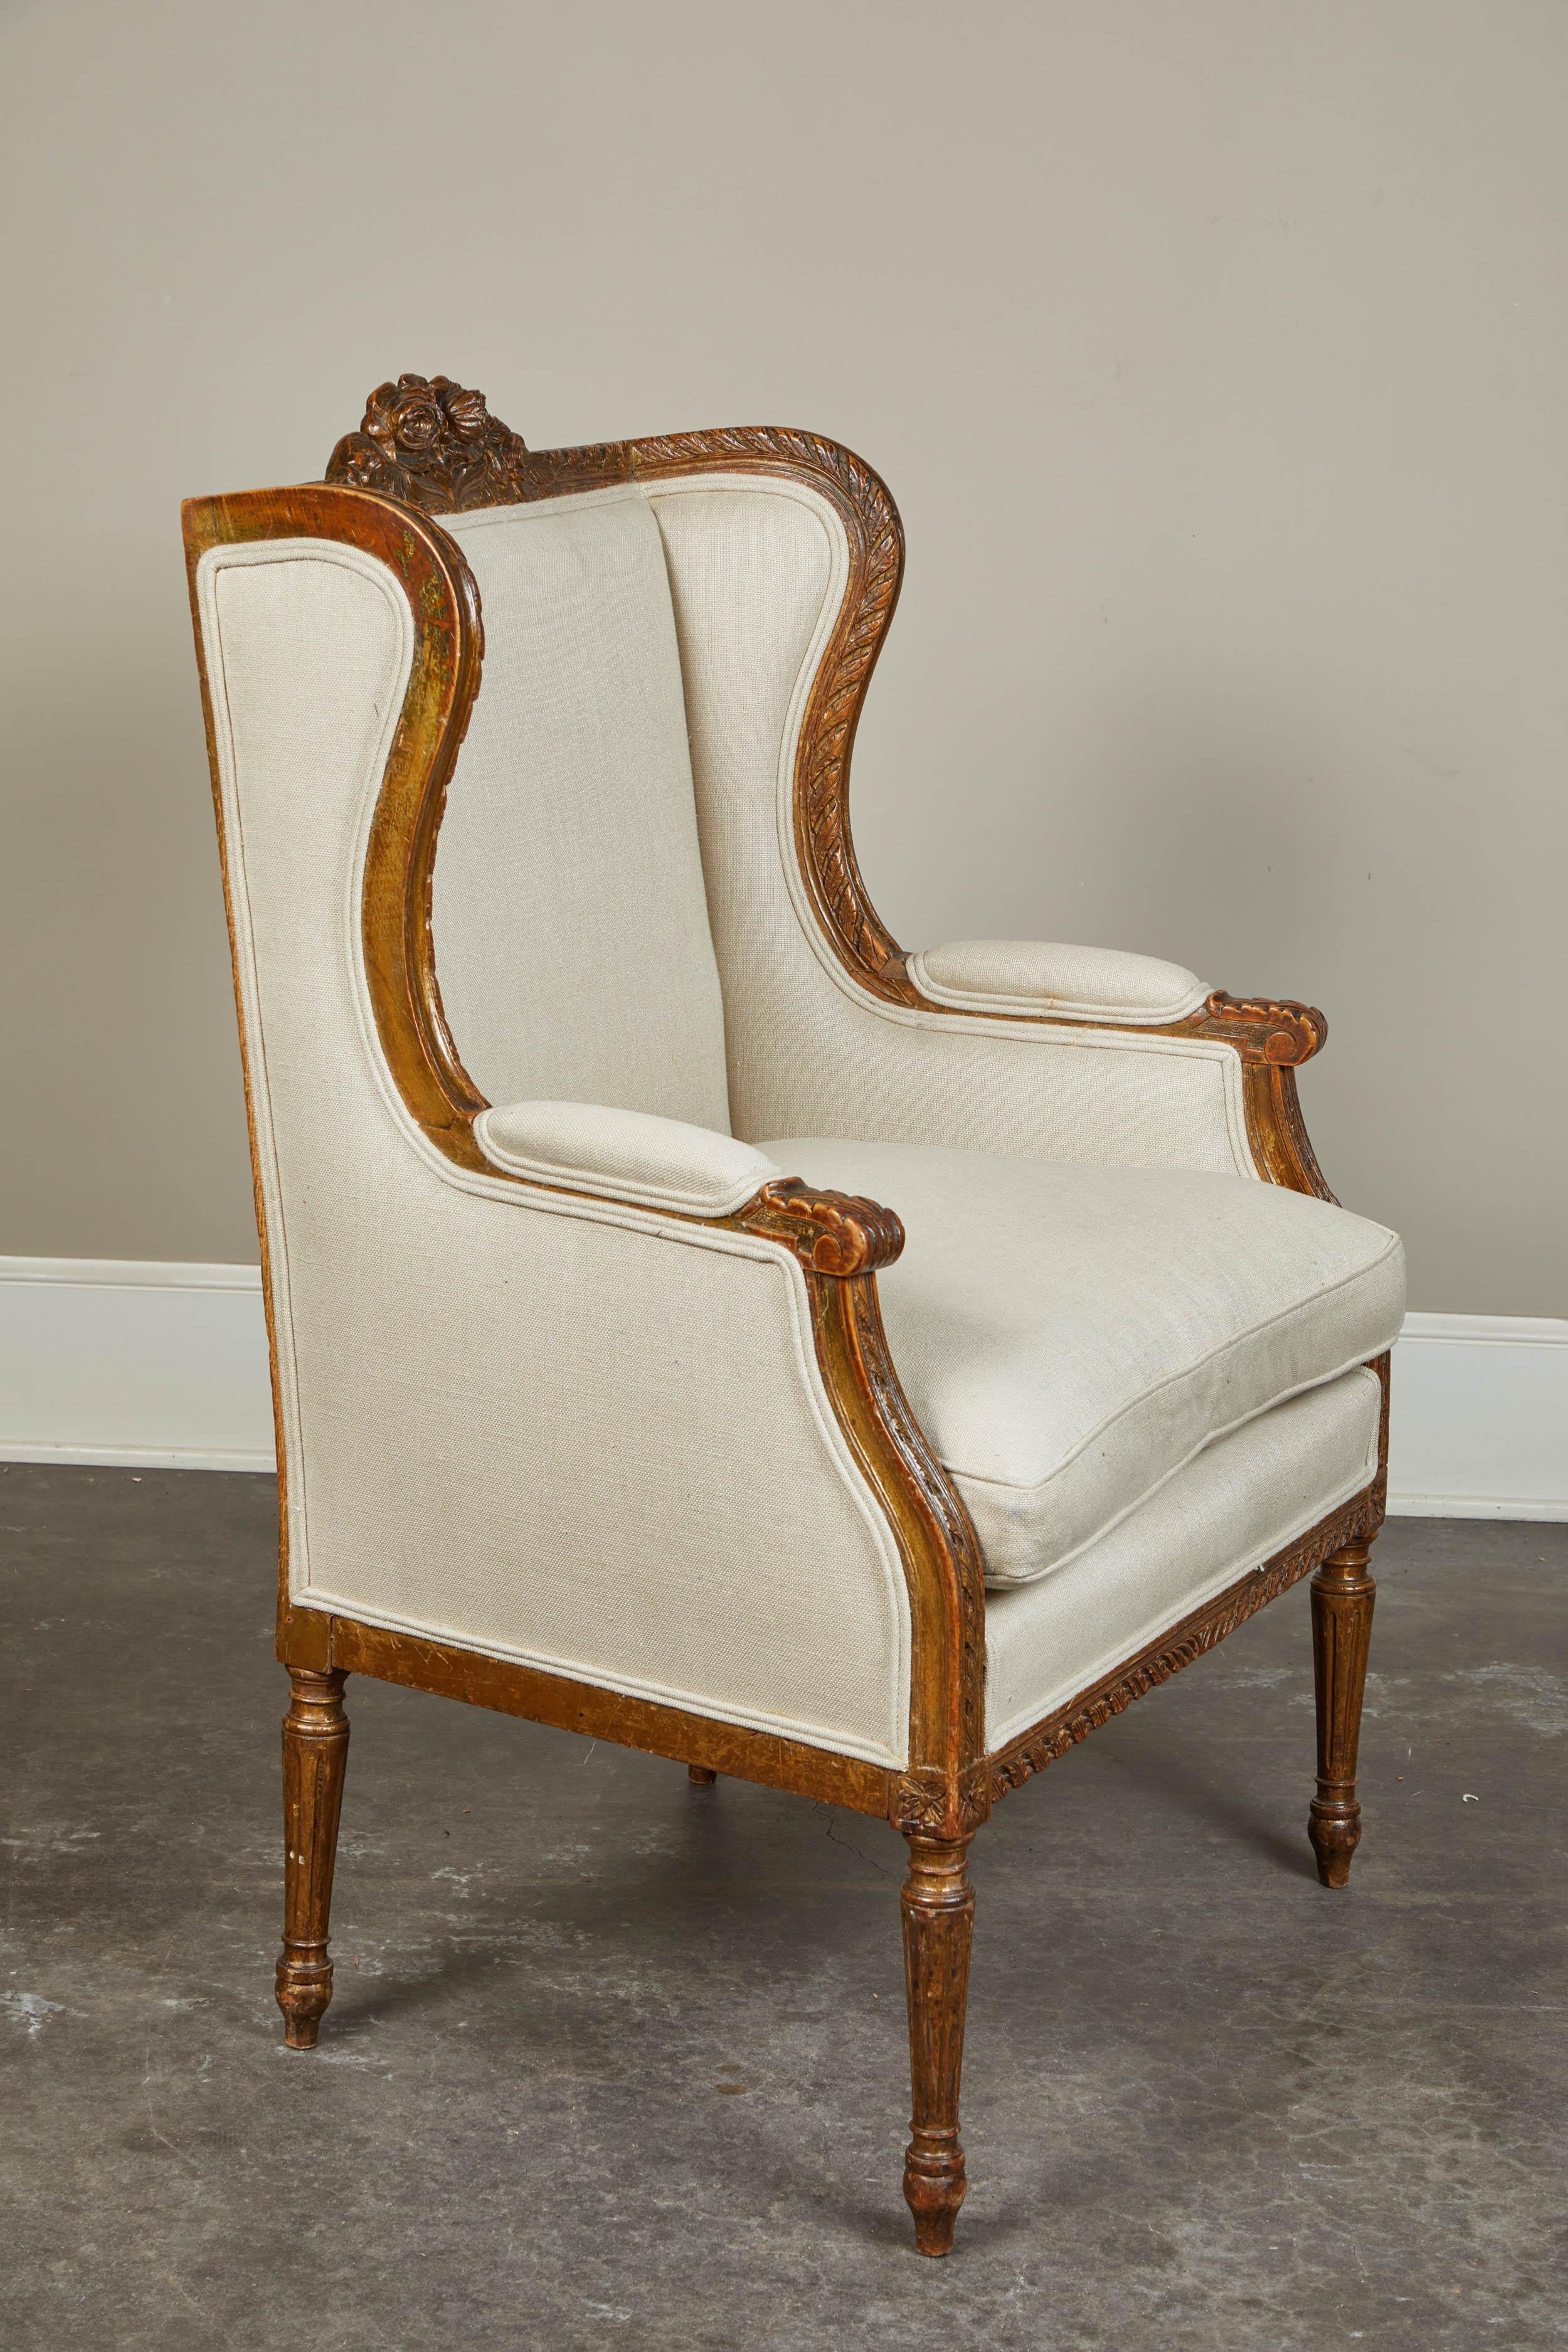 A lovely 19th century French wingback chair. Neutral upholstery, removable cushion and great carved details on a dark-wood frame.